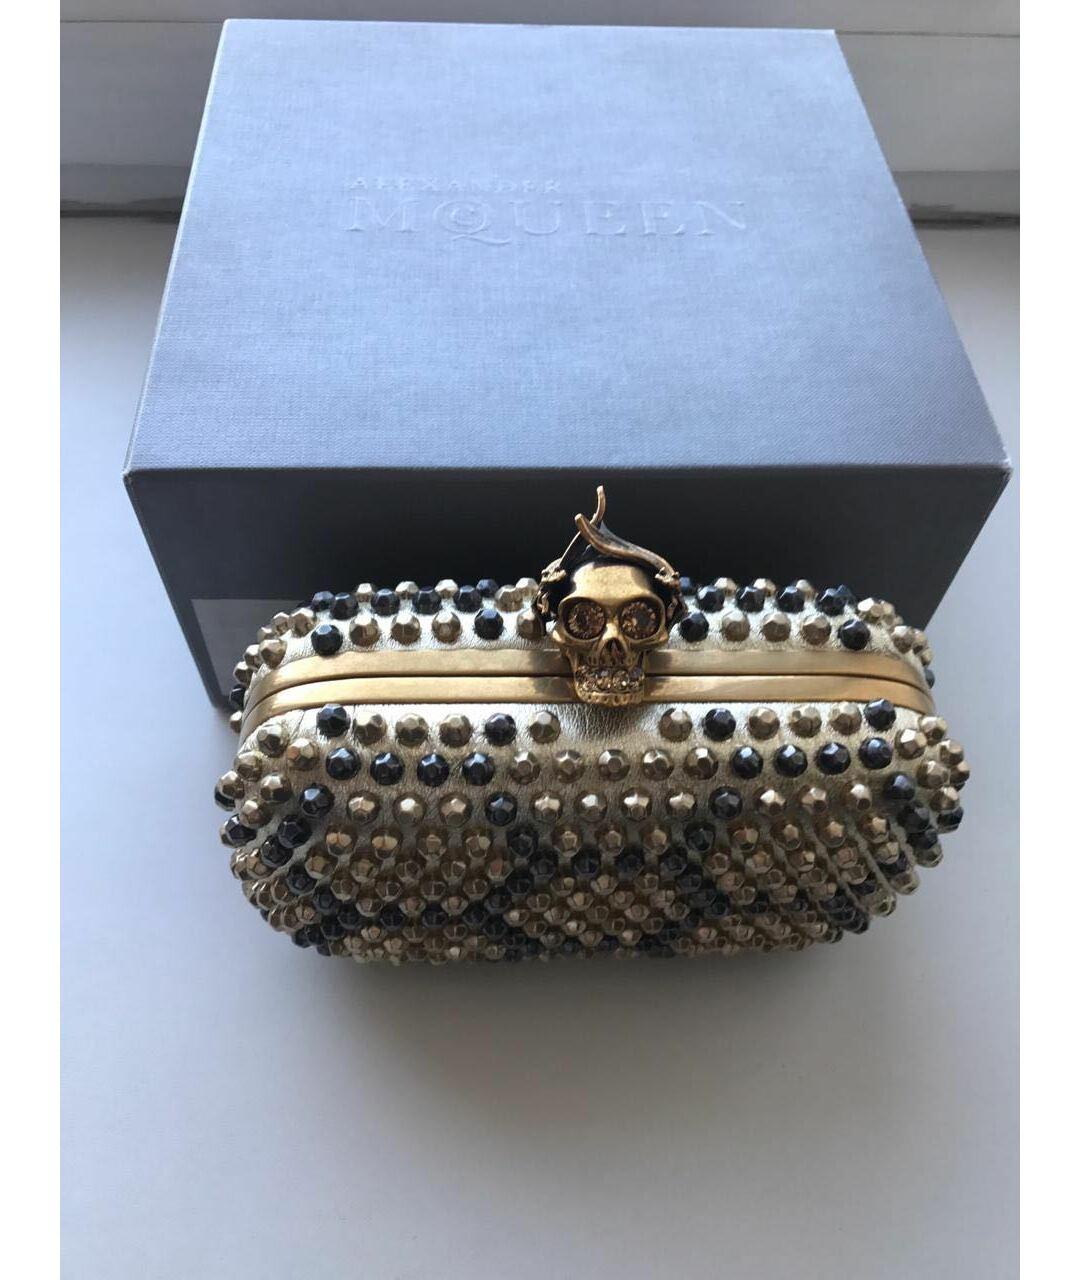 Alexander McQueen


Gold and black leather crystal embellished clutch bag



 Gold-tone hardware



Content: leather



Made in Italy

  

Brand new!

100% authentic guarantee 

       PLEASE VISIT OUR STORE FOR MORE GREAT ITEMS
os